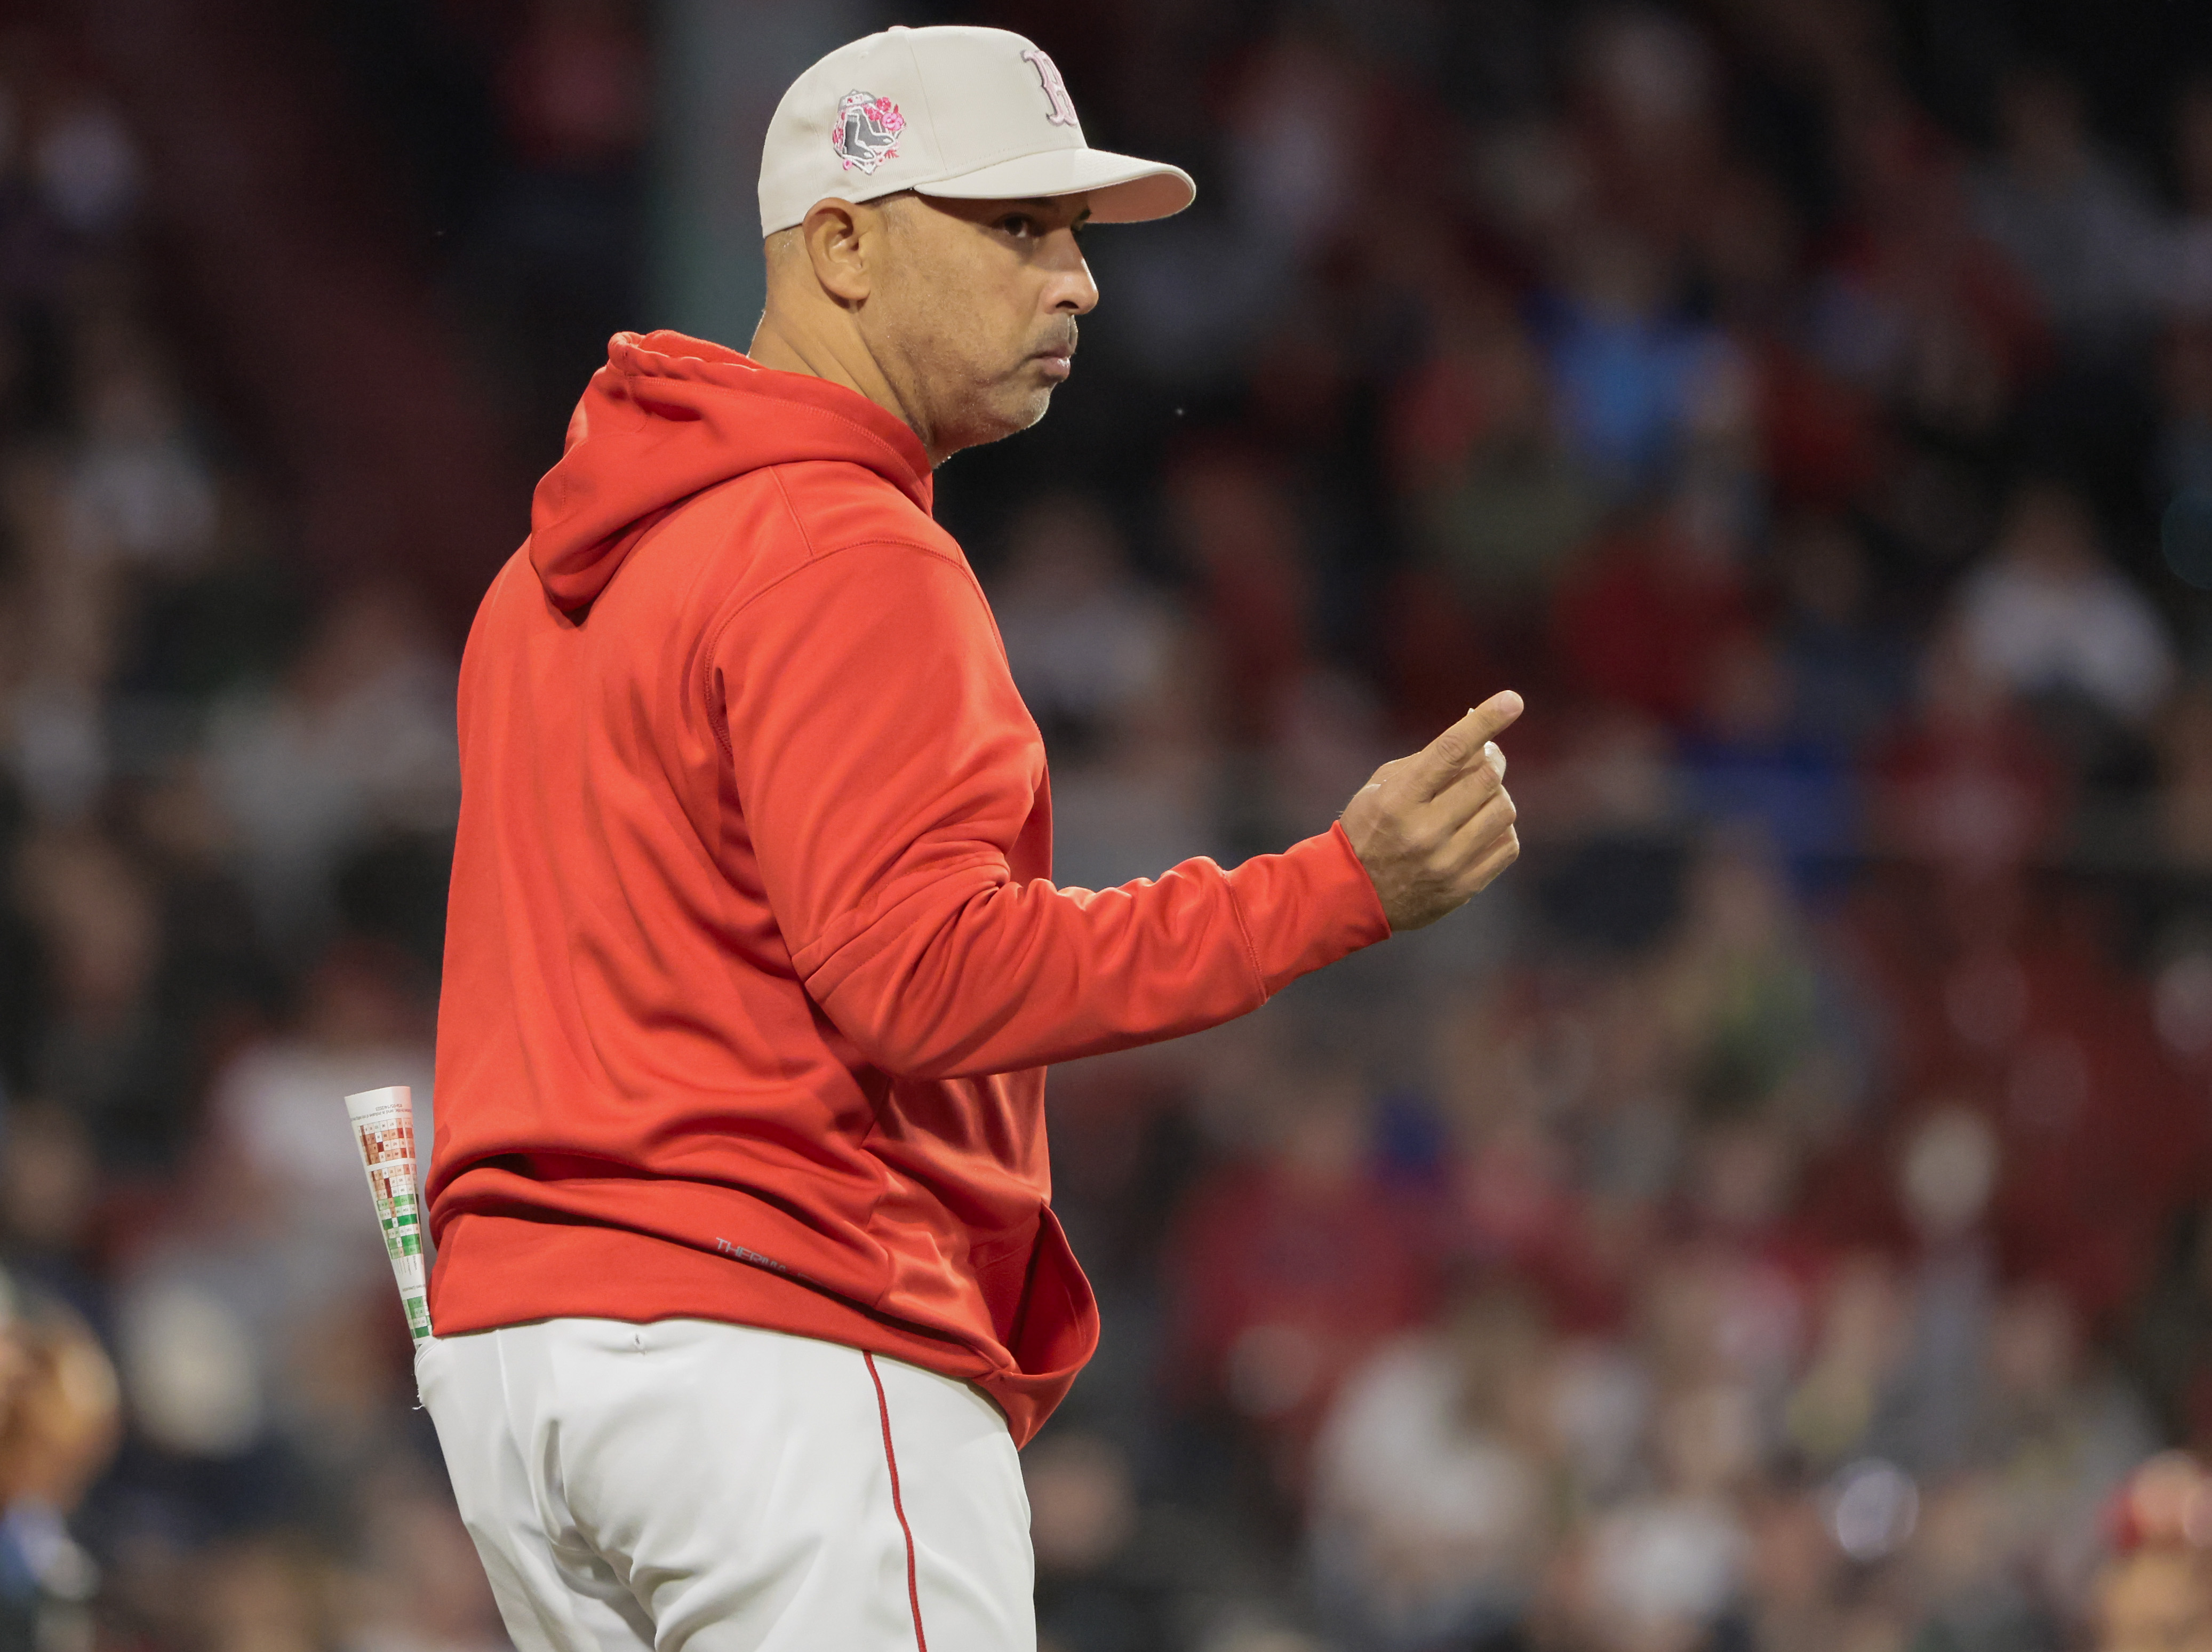 Everything Oli Marmol said about Cardinals controversial bullpen decisions